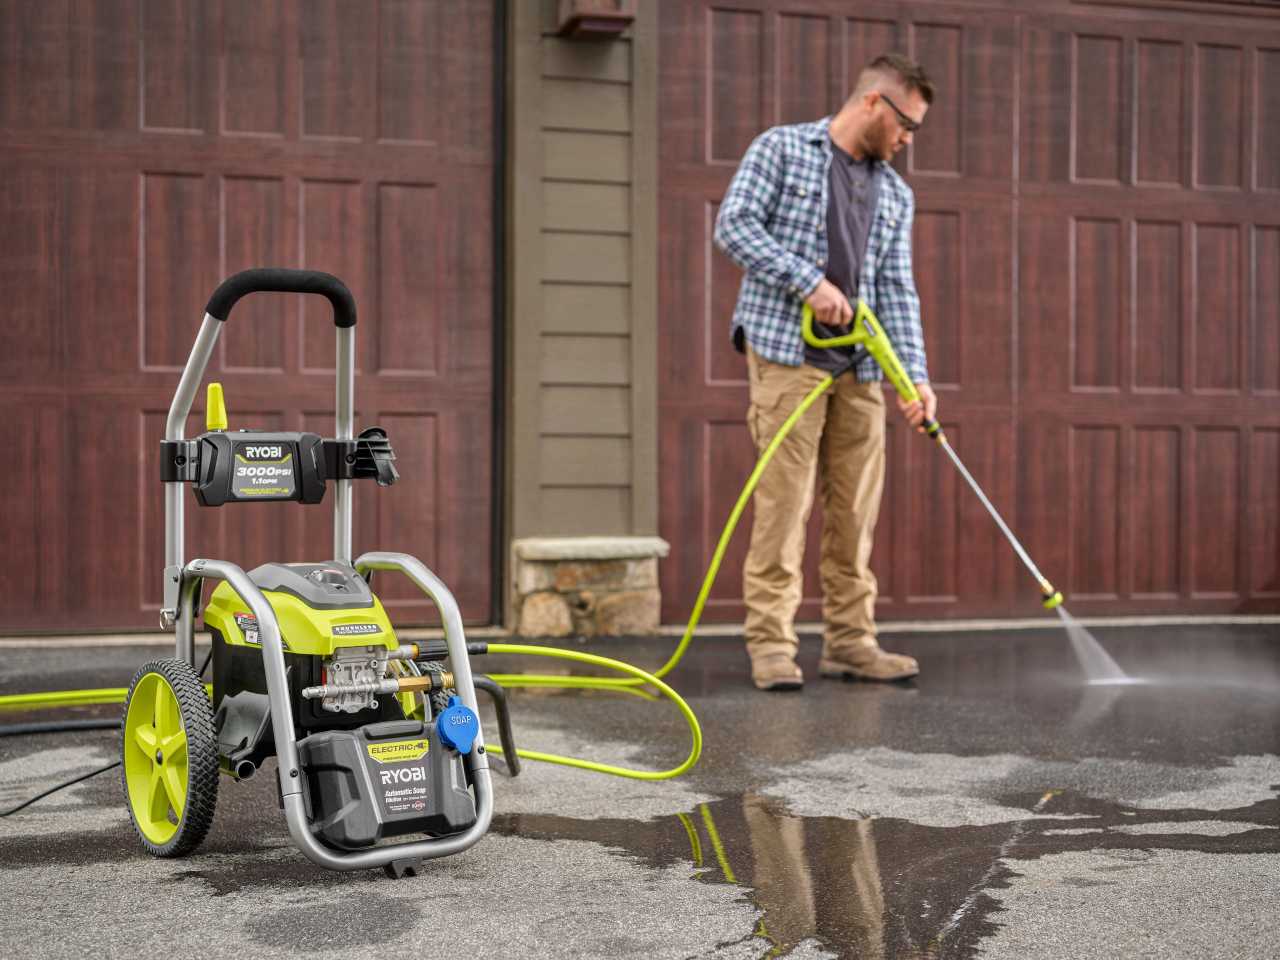 Product Features Image for 3000 PSI 1.1 GPM BRUSHLESS ELECTRIC PRESSURE WASHER.